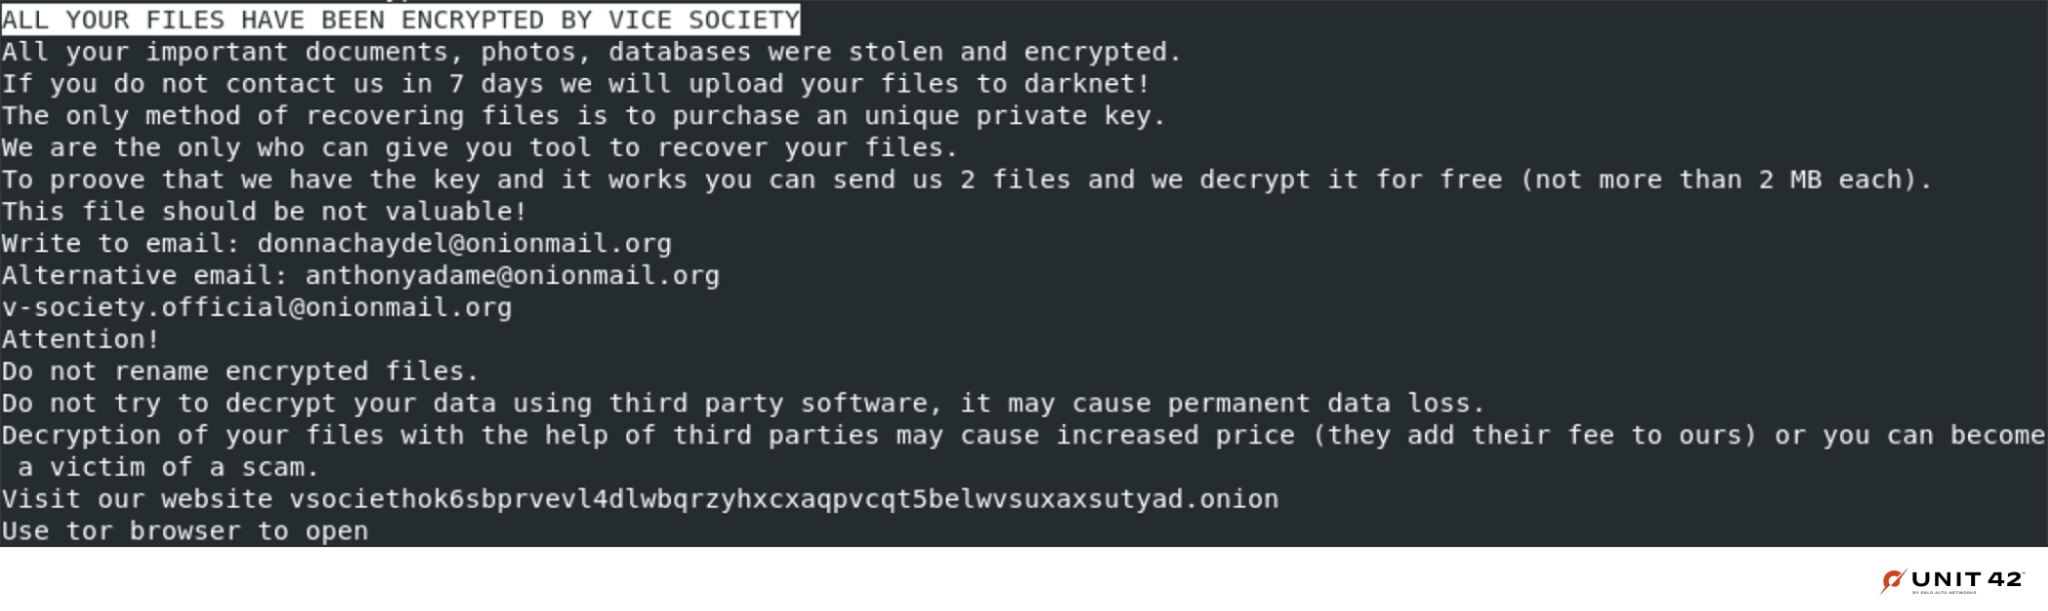 Figure 12 is a screenshot of a ransom note from Vice Society using HelloKitty ransomware. It details what was stolen, how to recover files, how prove encryption, how to make contact, what steps to avoid, and a request to visit the Vice Society website using Tor. 